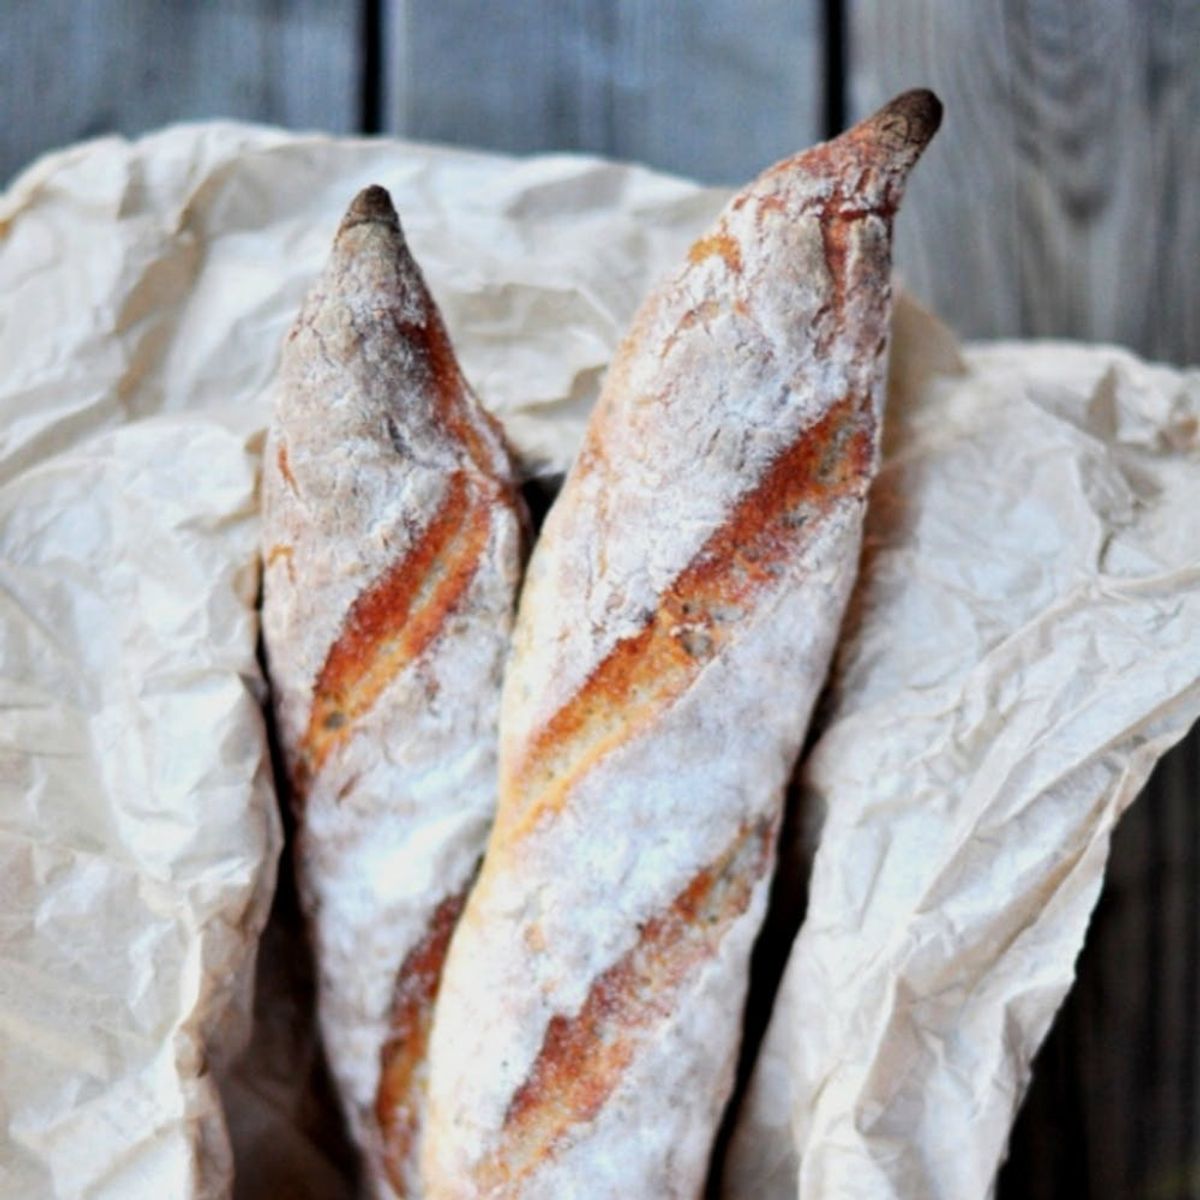 Gluten-Free French Bread That Tastes Like the Real Thing